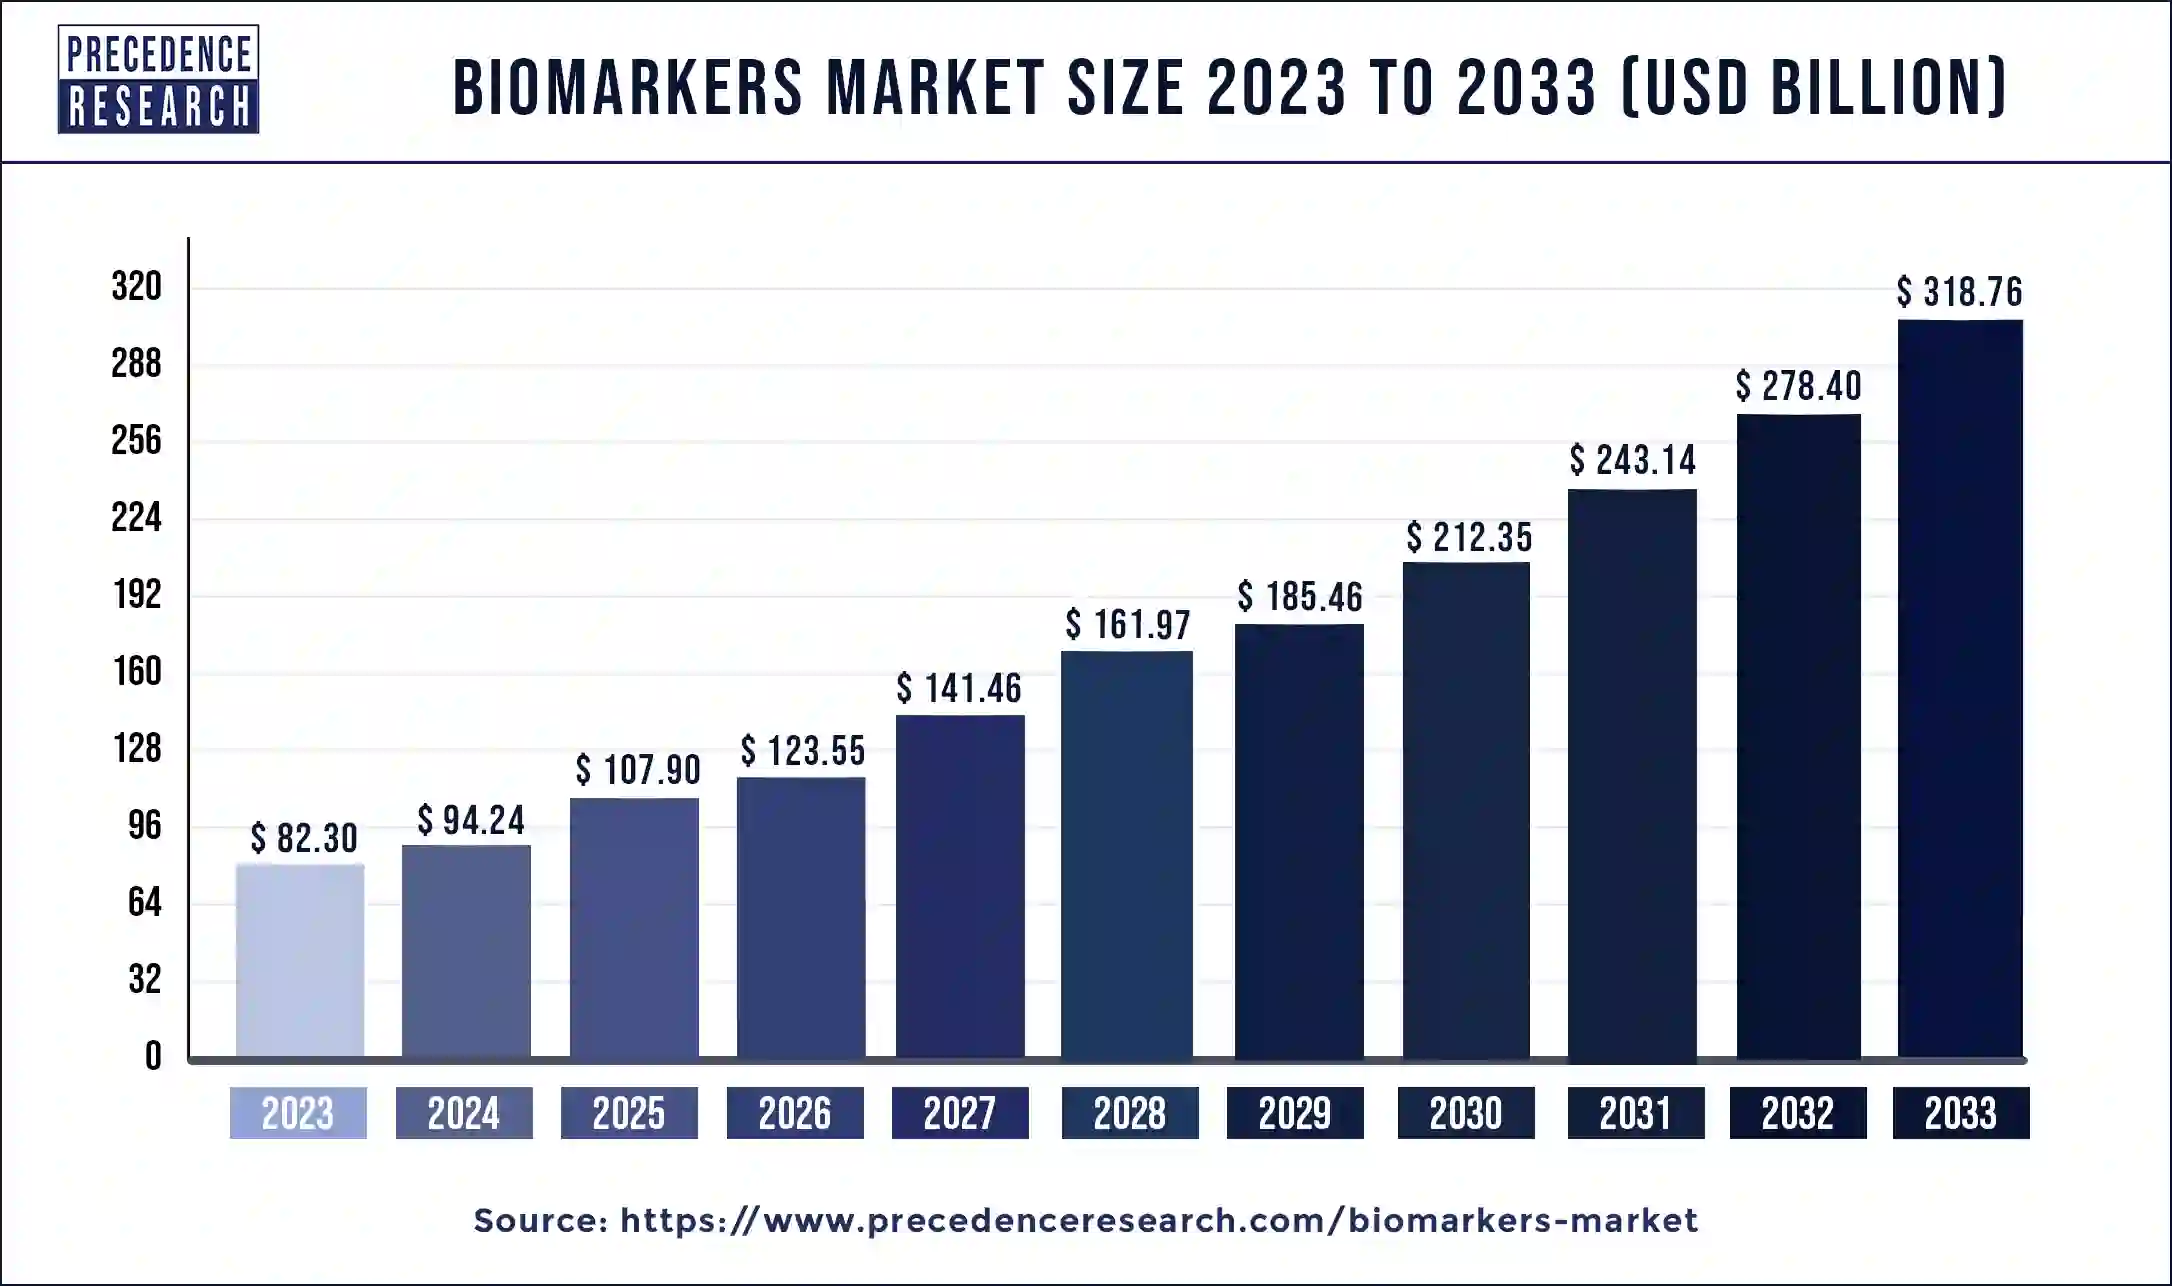 Biomarkers Market Size 2024 to 2033